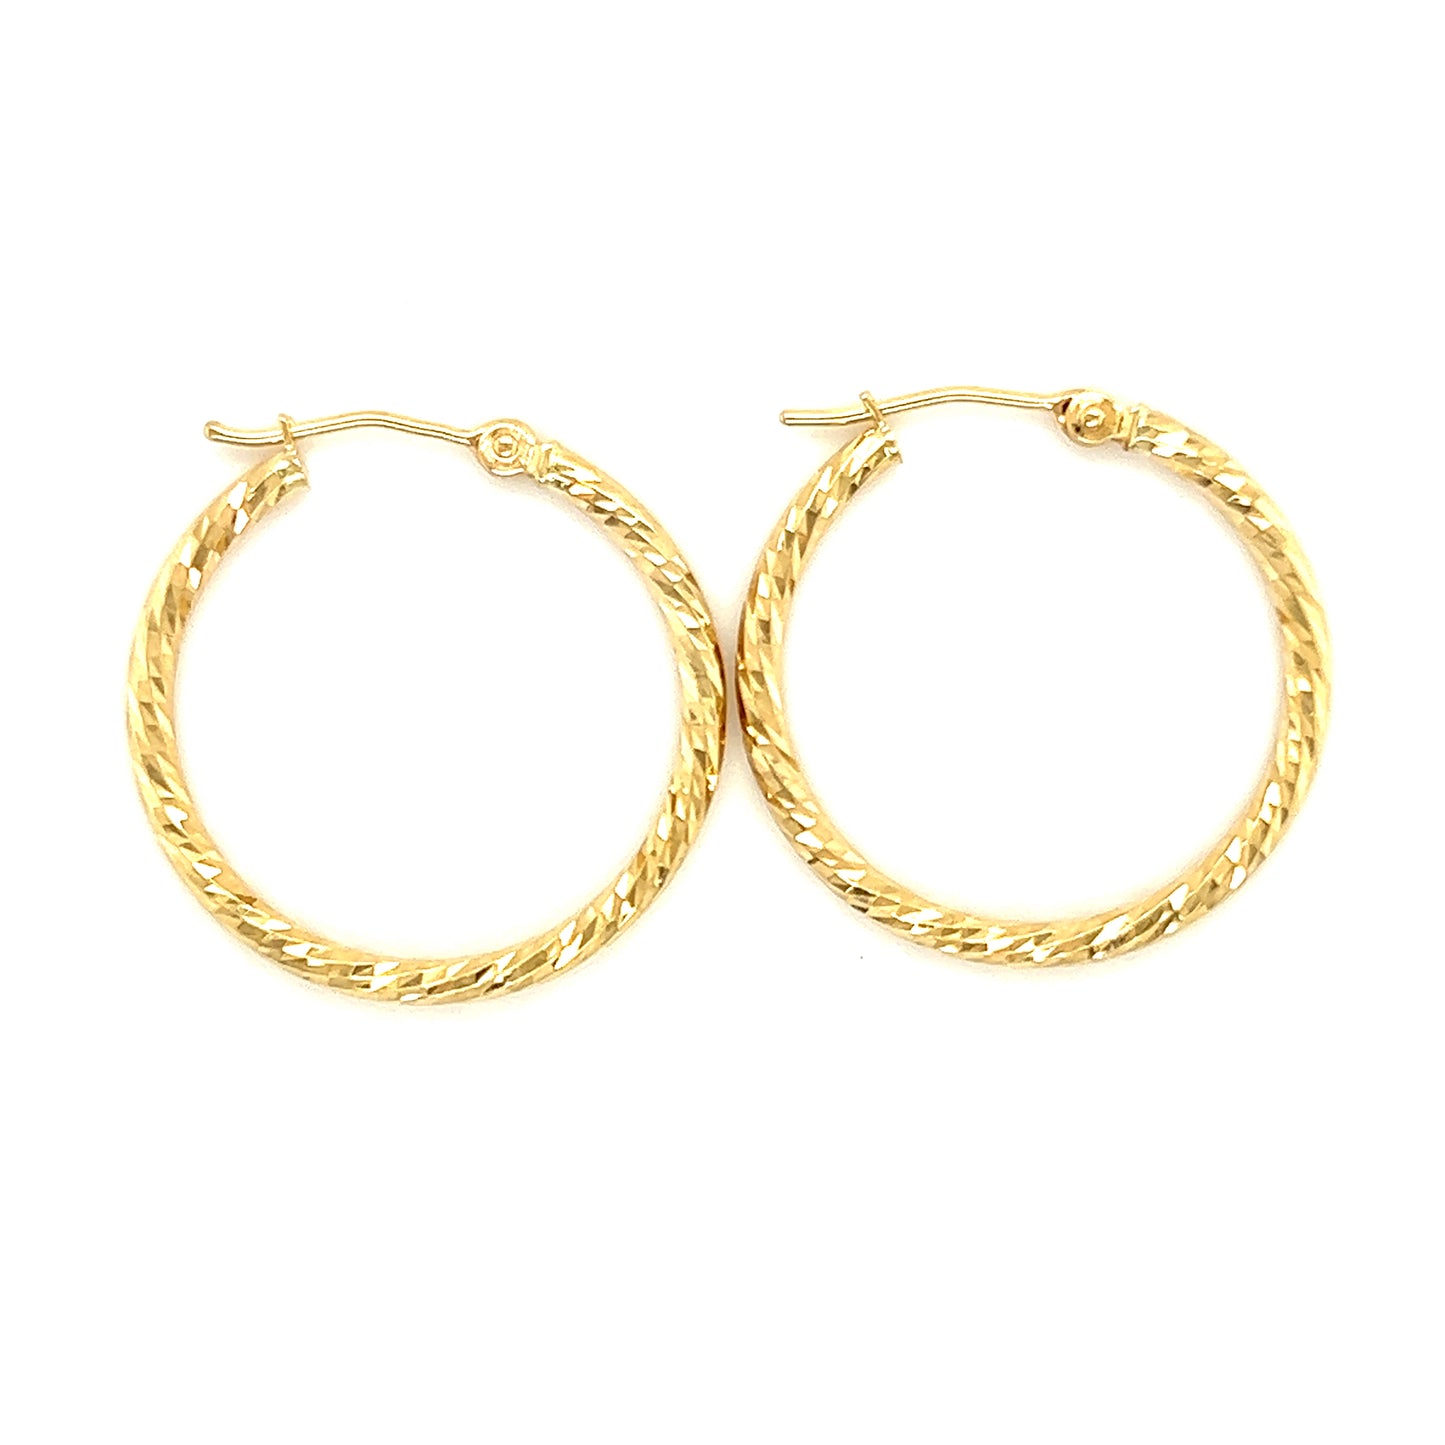 Round Hoop 25.5mm Earrings with Diamond-cut Finish in 14K Yellow Gold Top View